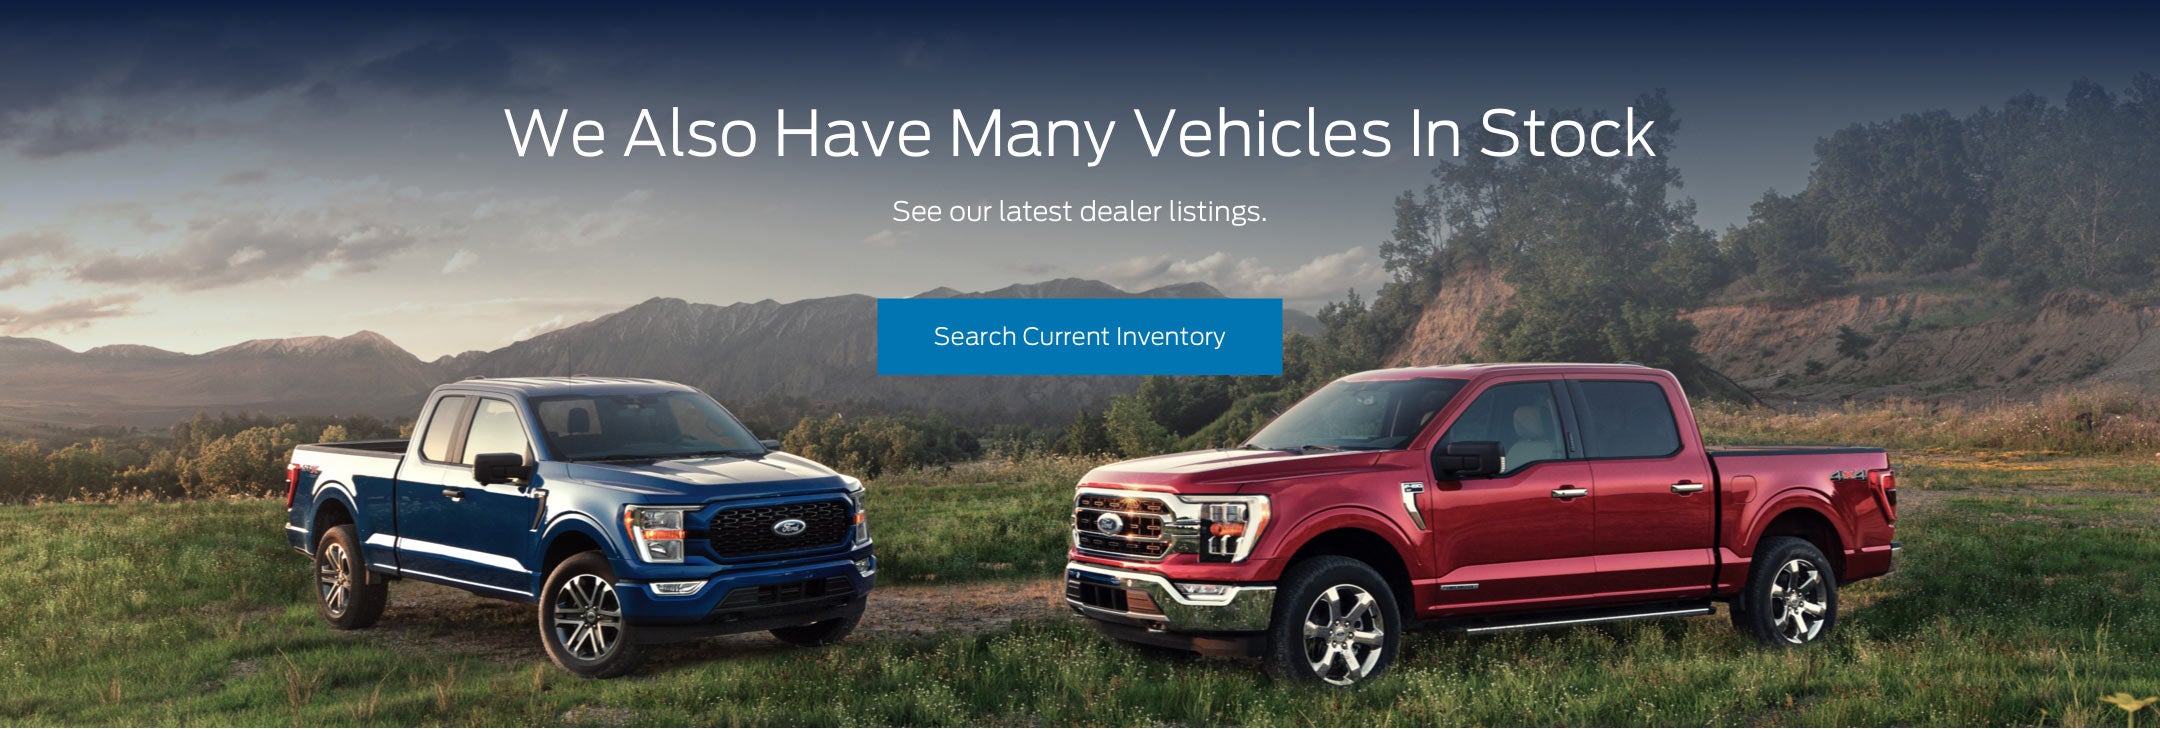 Ford vehicles in stock | Russell Barnett Ford of Tullahoma in Tullahoma TN